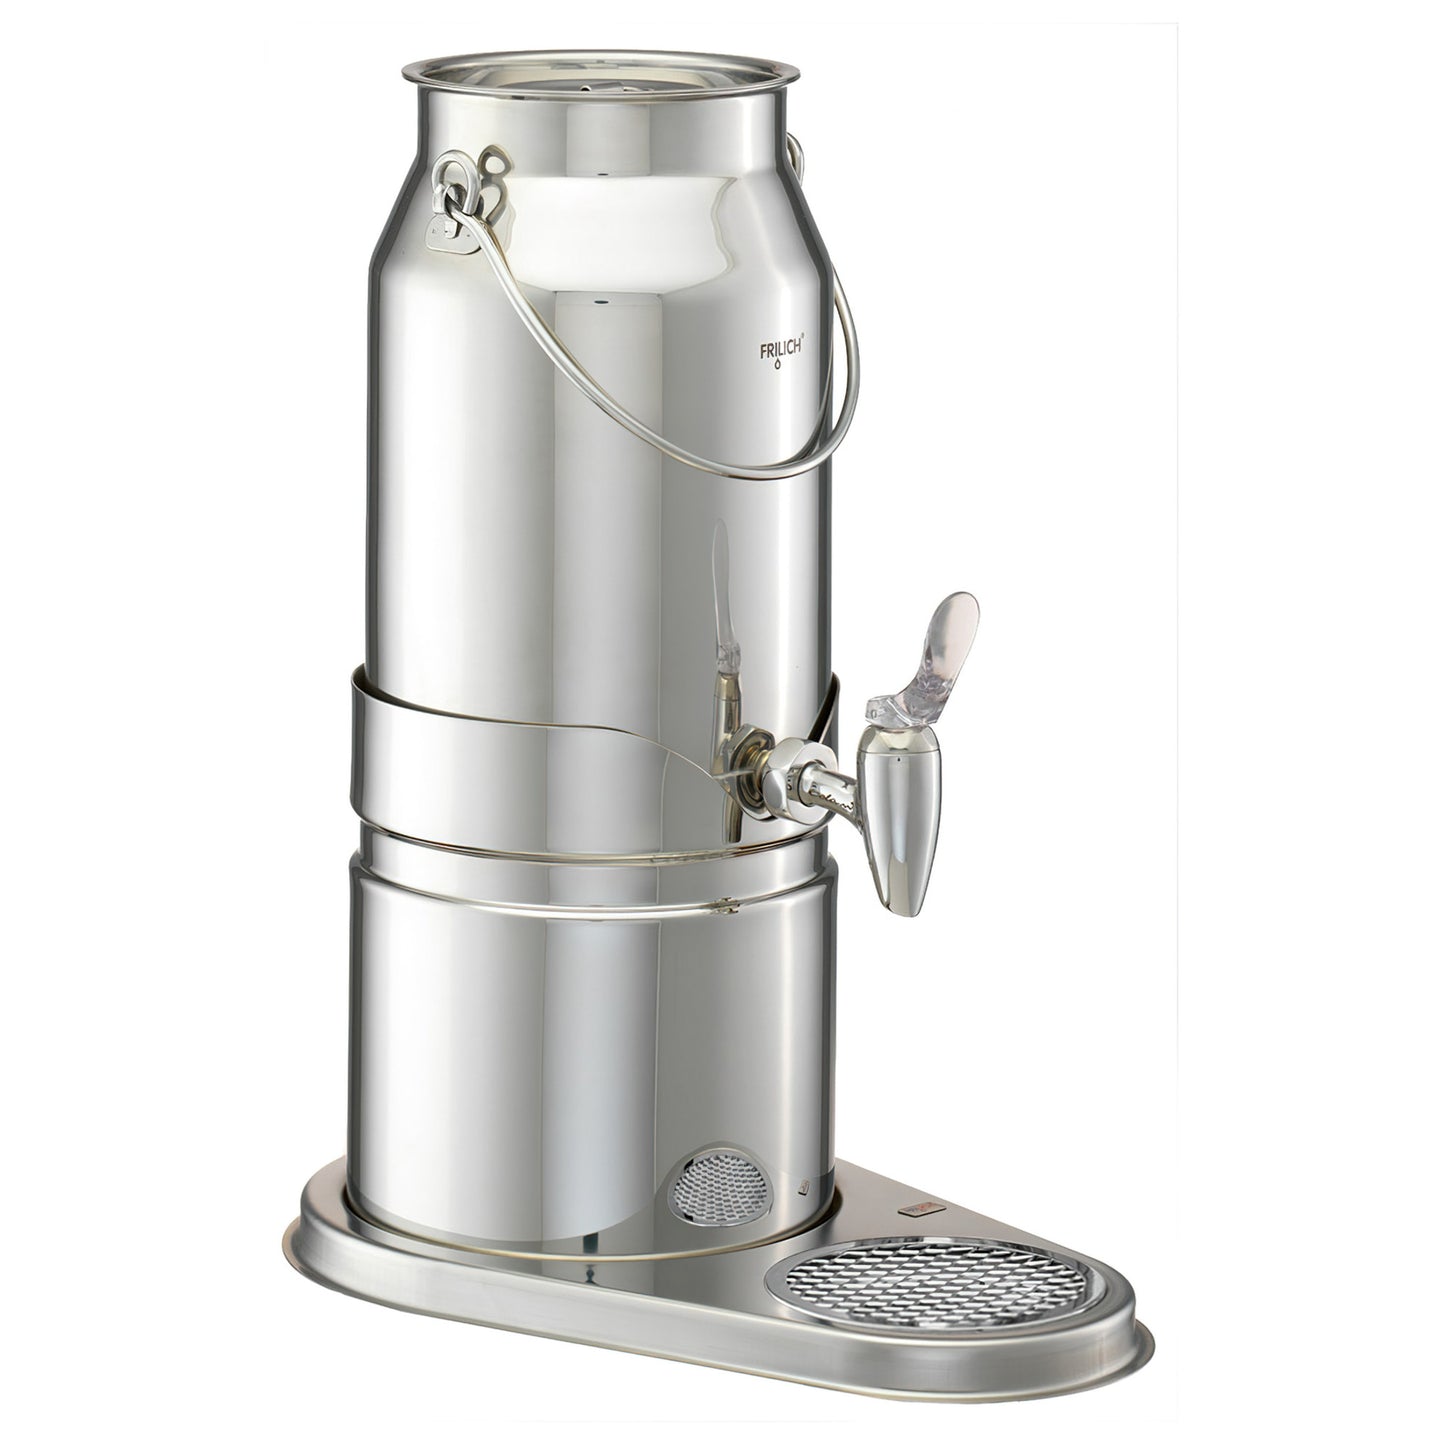 3.2 qt. / 0.8 gal. / 3L Stainless Steel Milk Dispenser Set. Includes Stainless Steel Can, Crushed Ice Tube, Drip Tray, Cooling Pack, and Base. 13.2" x 8.1", 15.7" tall, FRILICH EMC030E ELEGANCE